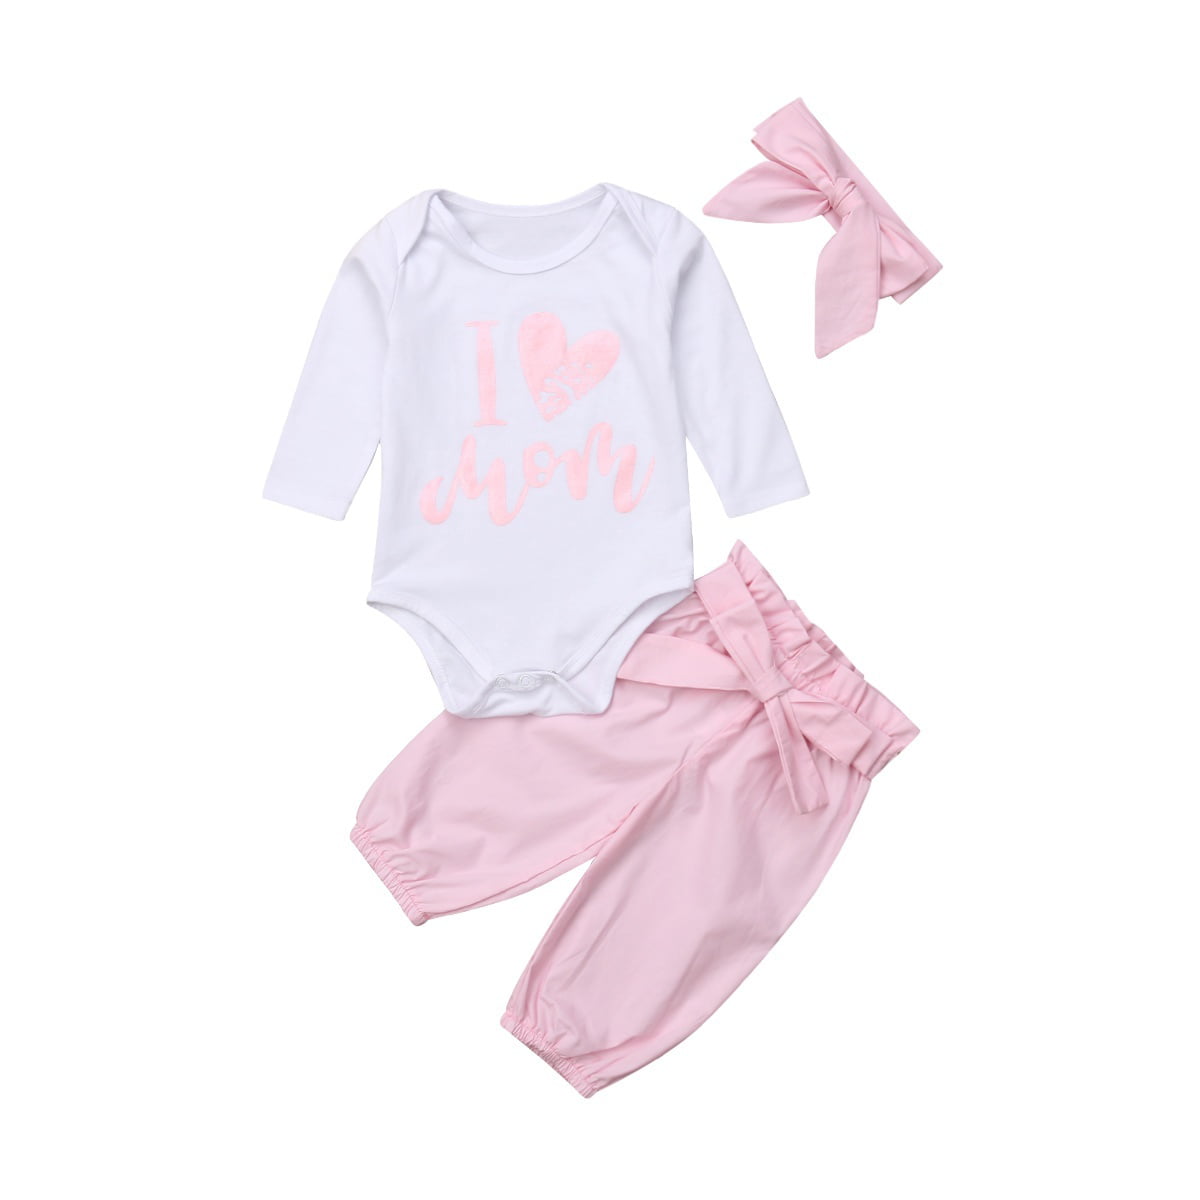 Fashion Newborn Baby Girls Clothes Outfit Long Sleeve Bodysuit ...